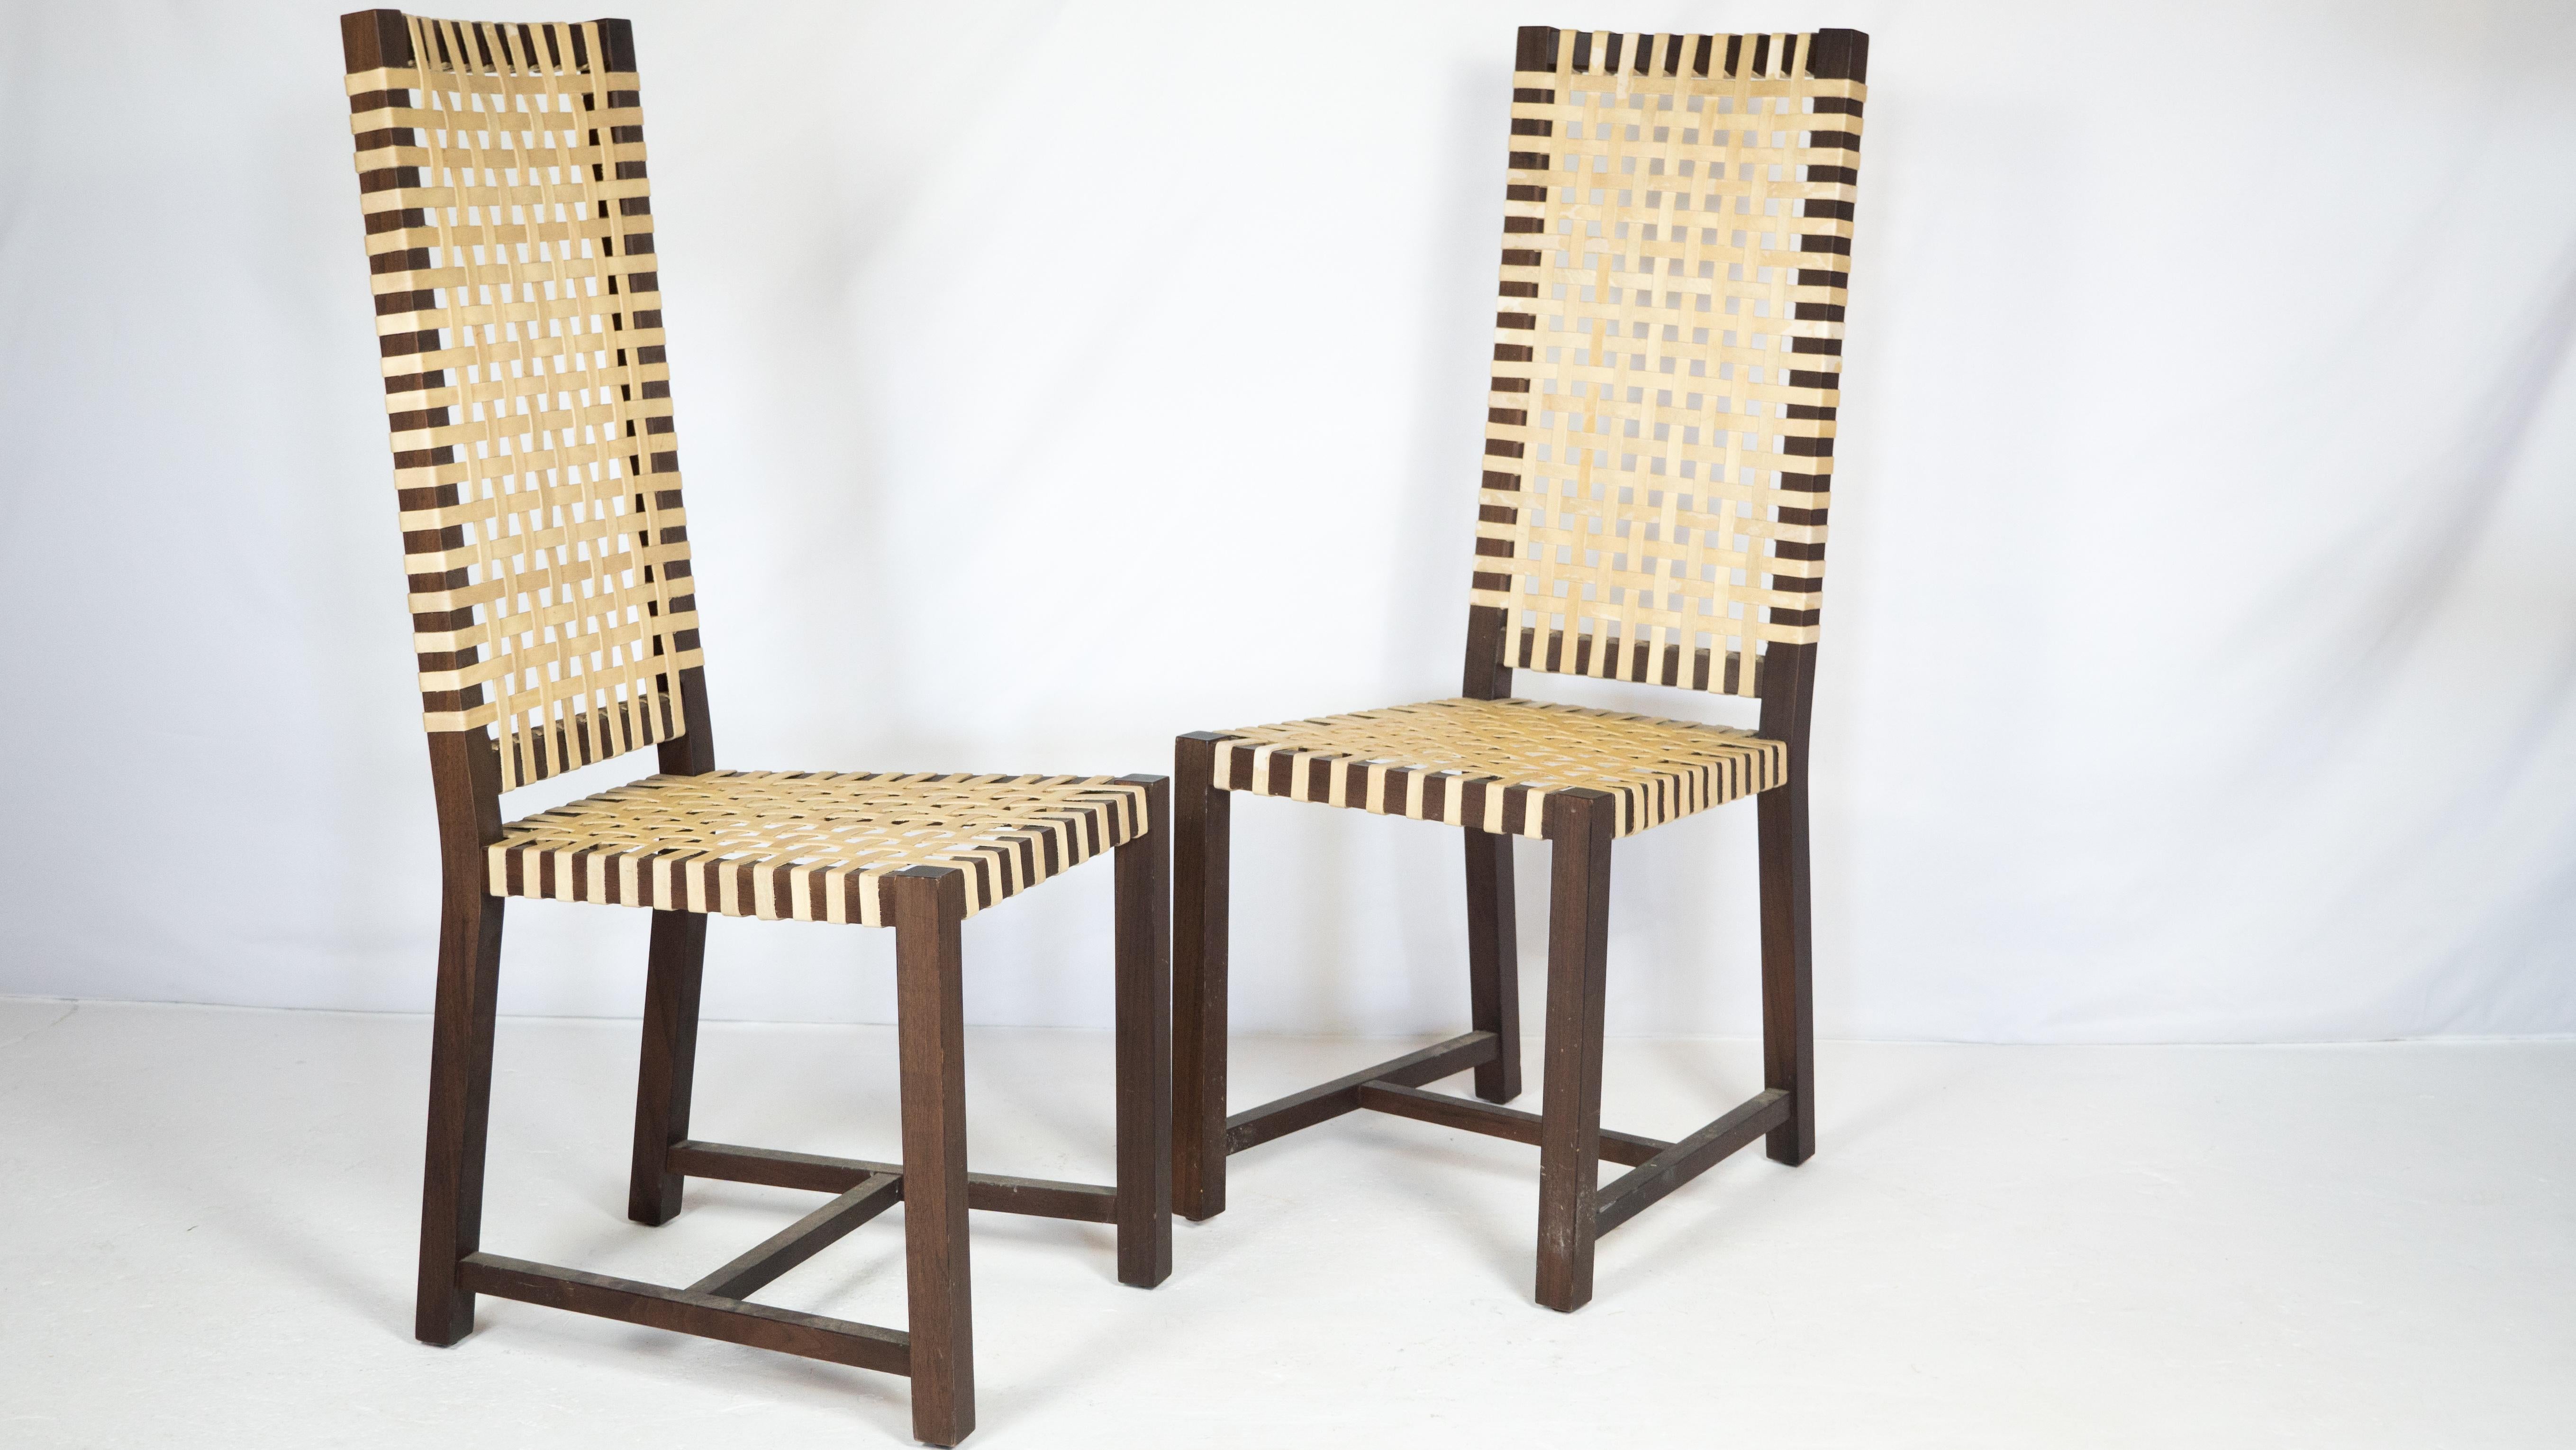 1980s Italian Architectural Otto 121' High Back Chairs by Paola Navone for Gerva For Sale 4